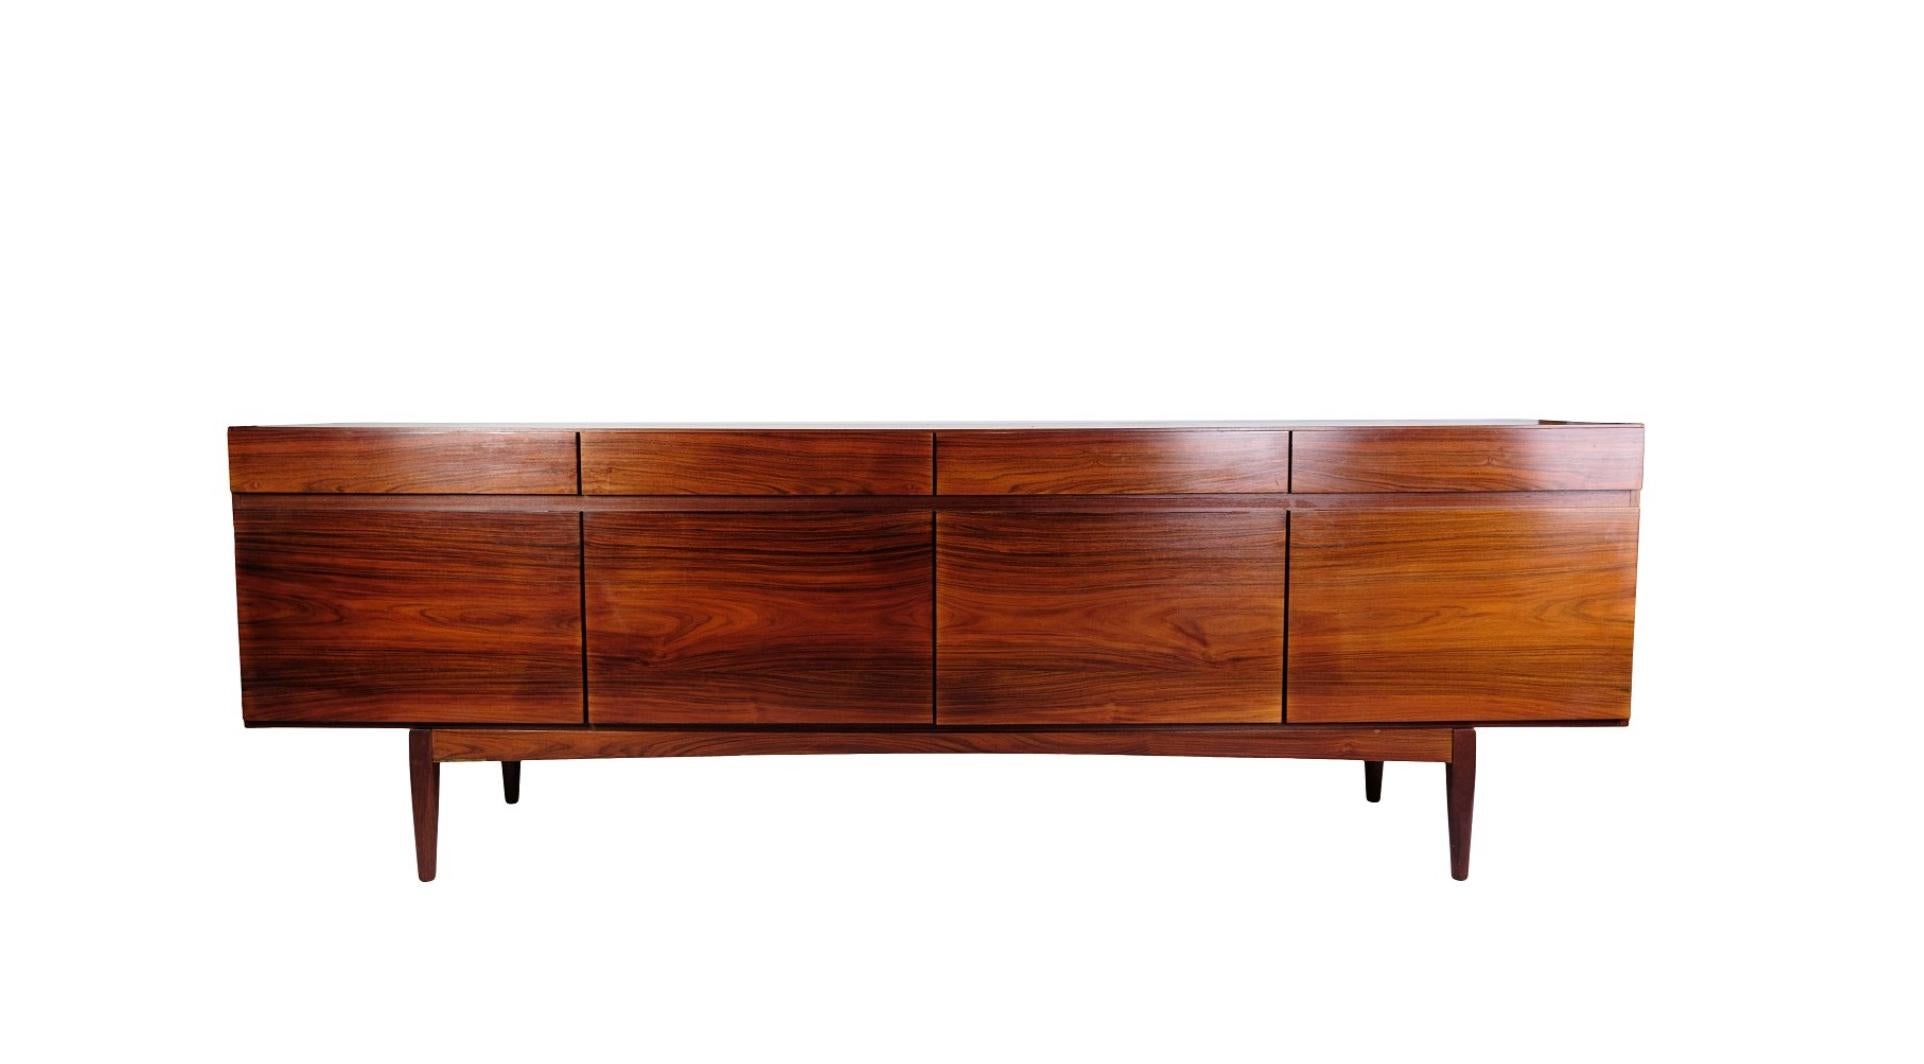 Rosewood sideboard designed by Ib Kofod-Larsen, model FA66 manufactured at Faarup Møbelfabrik in the 1960s. A low free-standing sideboard of the highest quality. It is veneered with rosewood with a very beautiful structure. In the front it has four